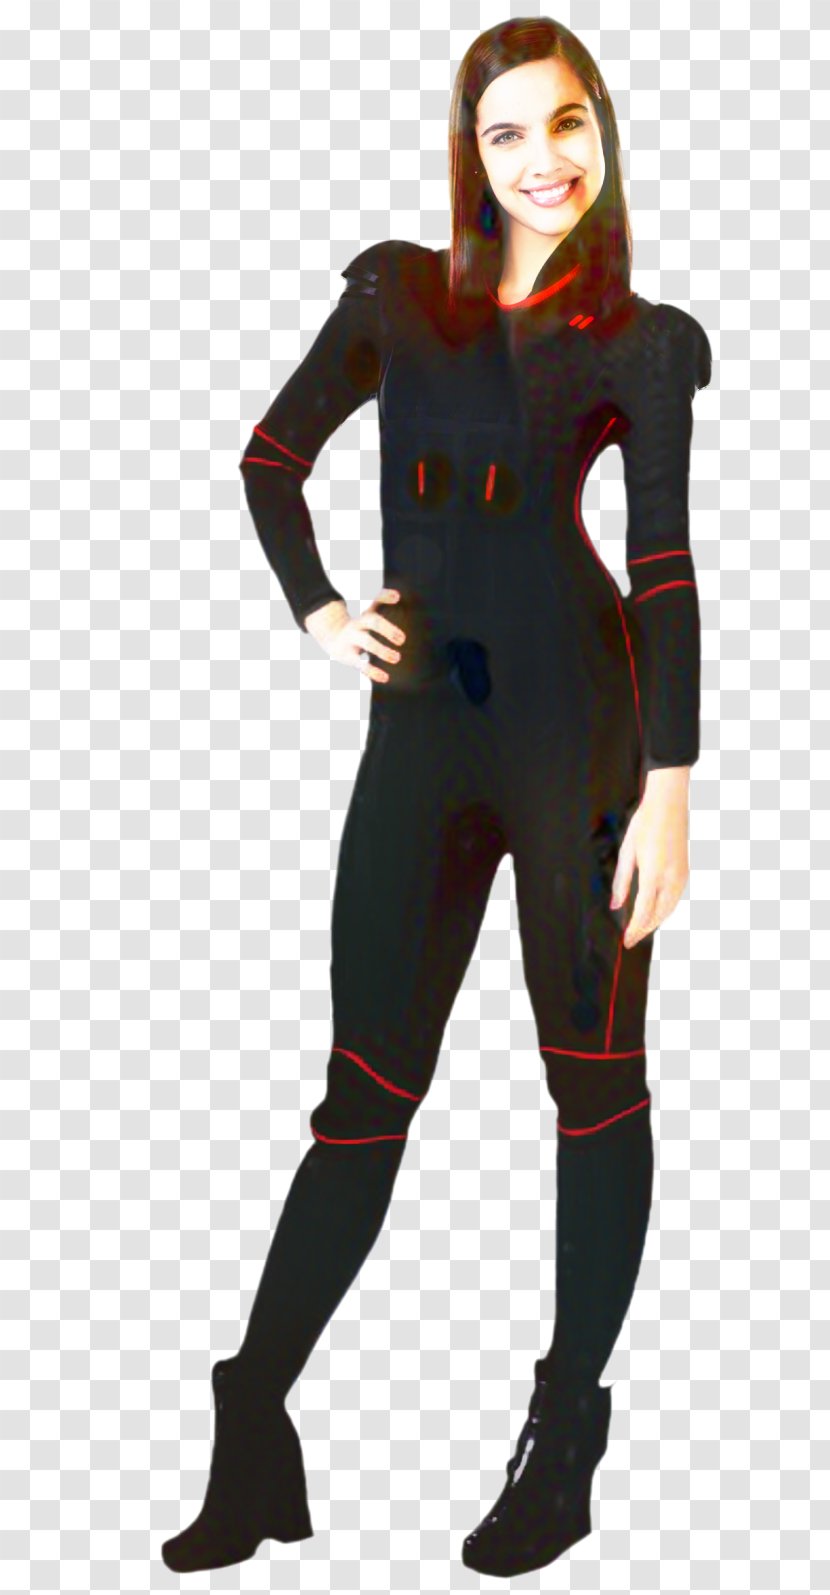 Yo Soy Franky Wetsuit - Spandex - Costume Transparent PNG